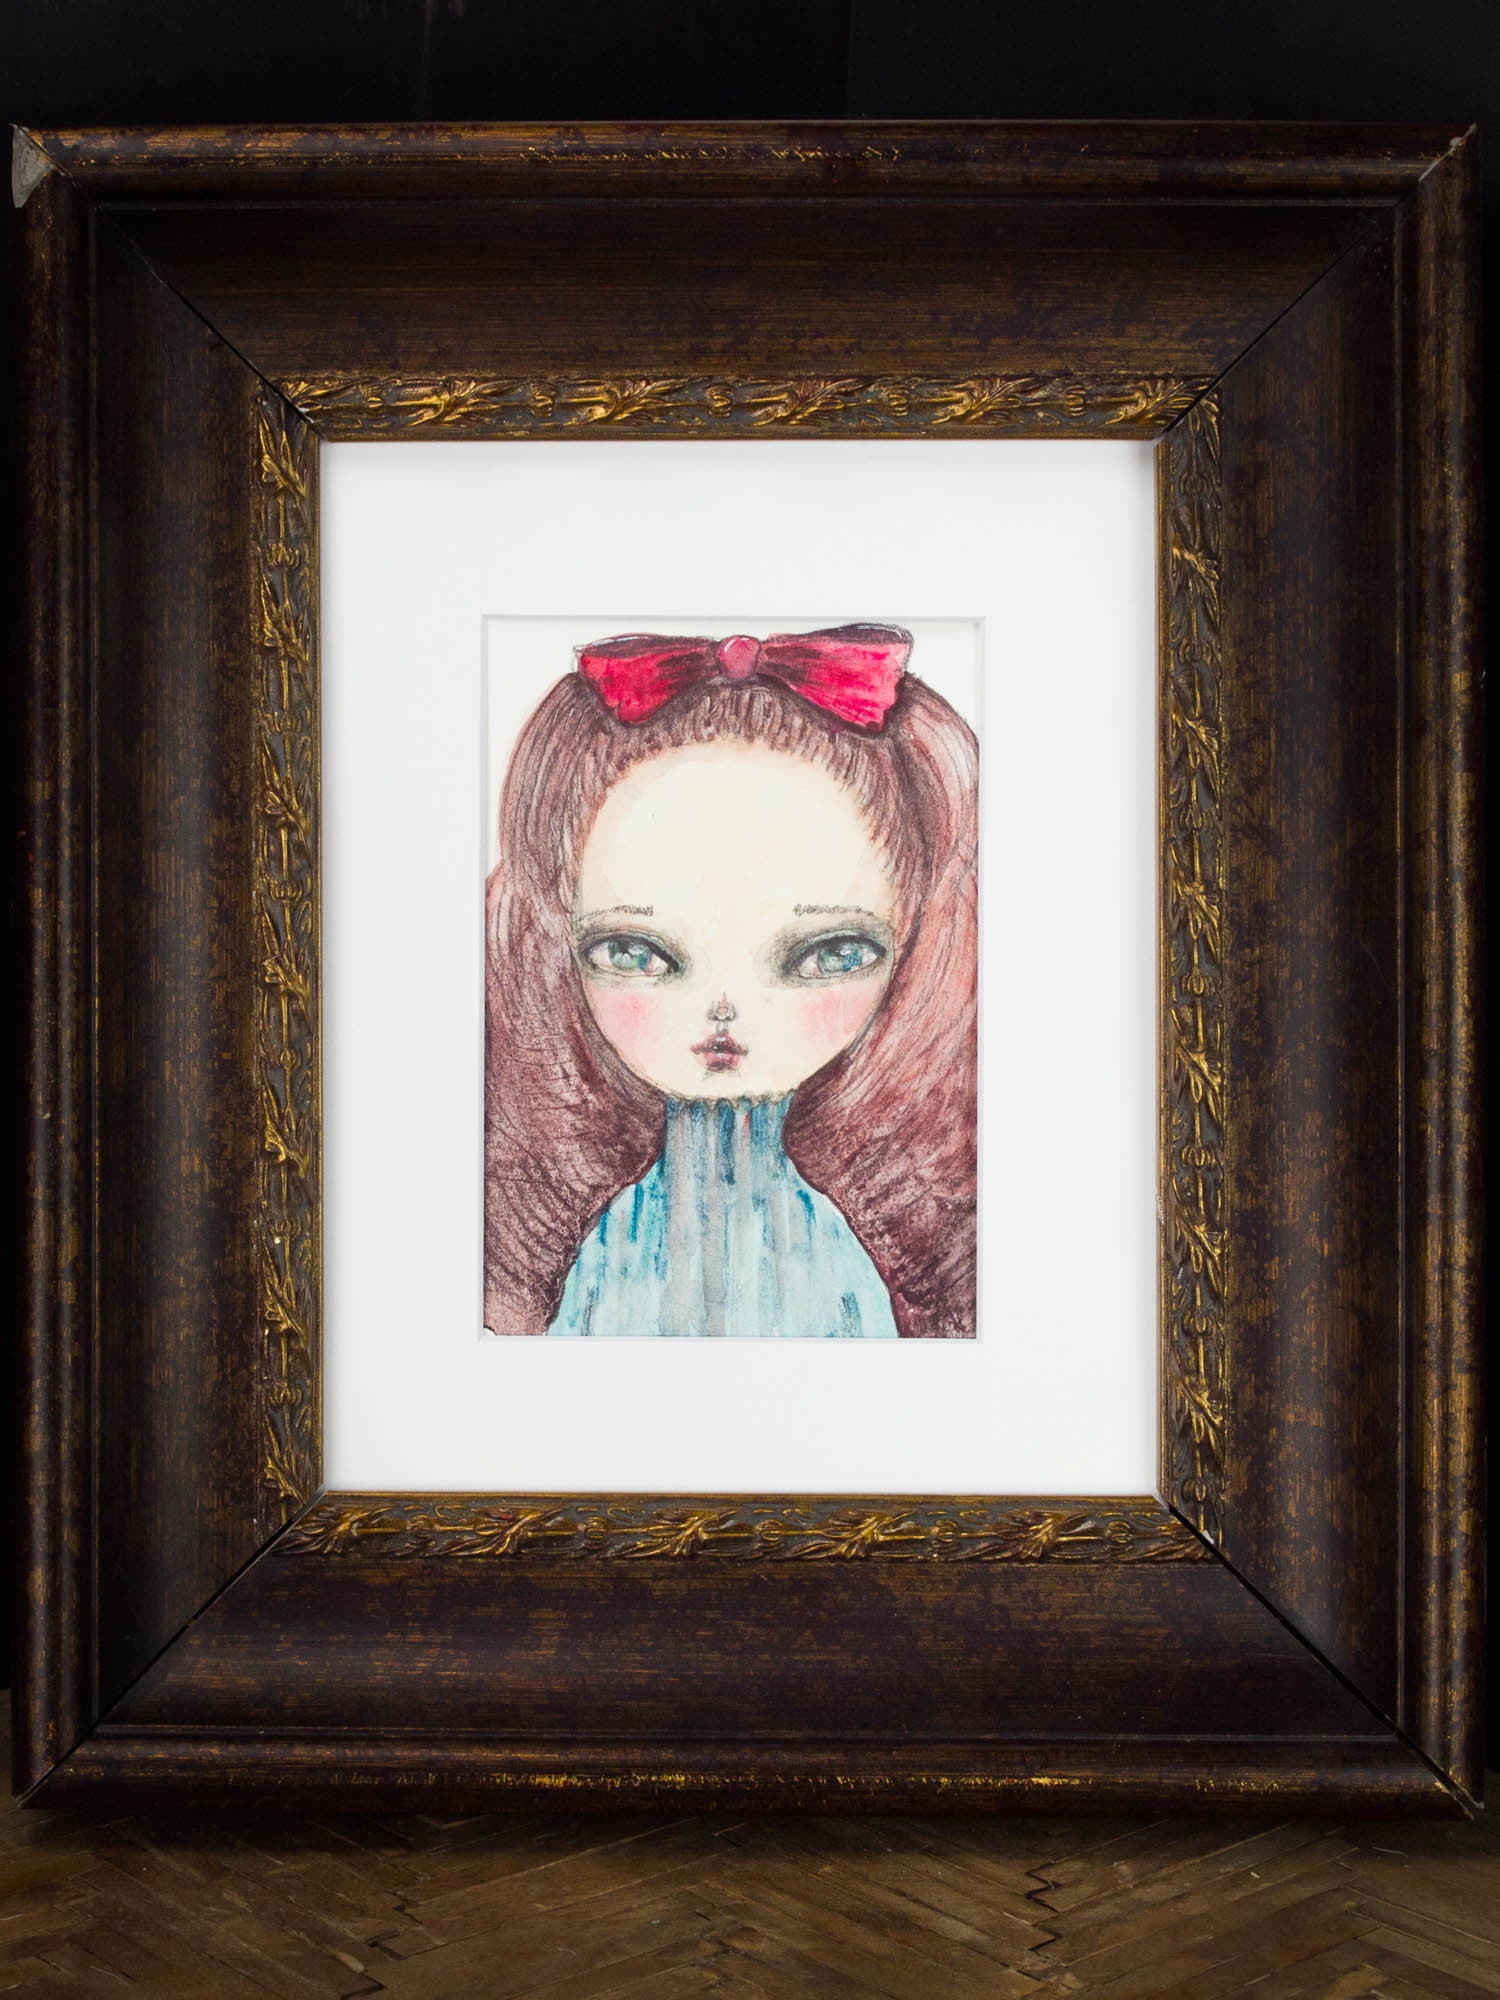 Watercolors and experimentation make fresh and beautiful additions to Danita's growing collection of original paintings, with beautiful surreal eyes and faces.